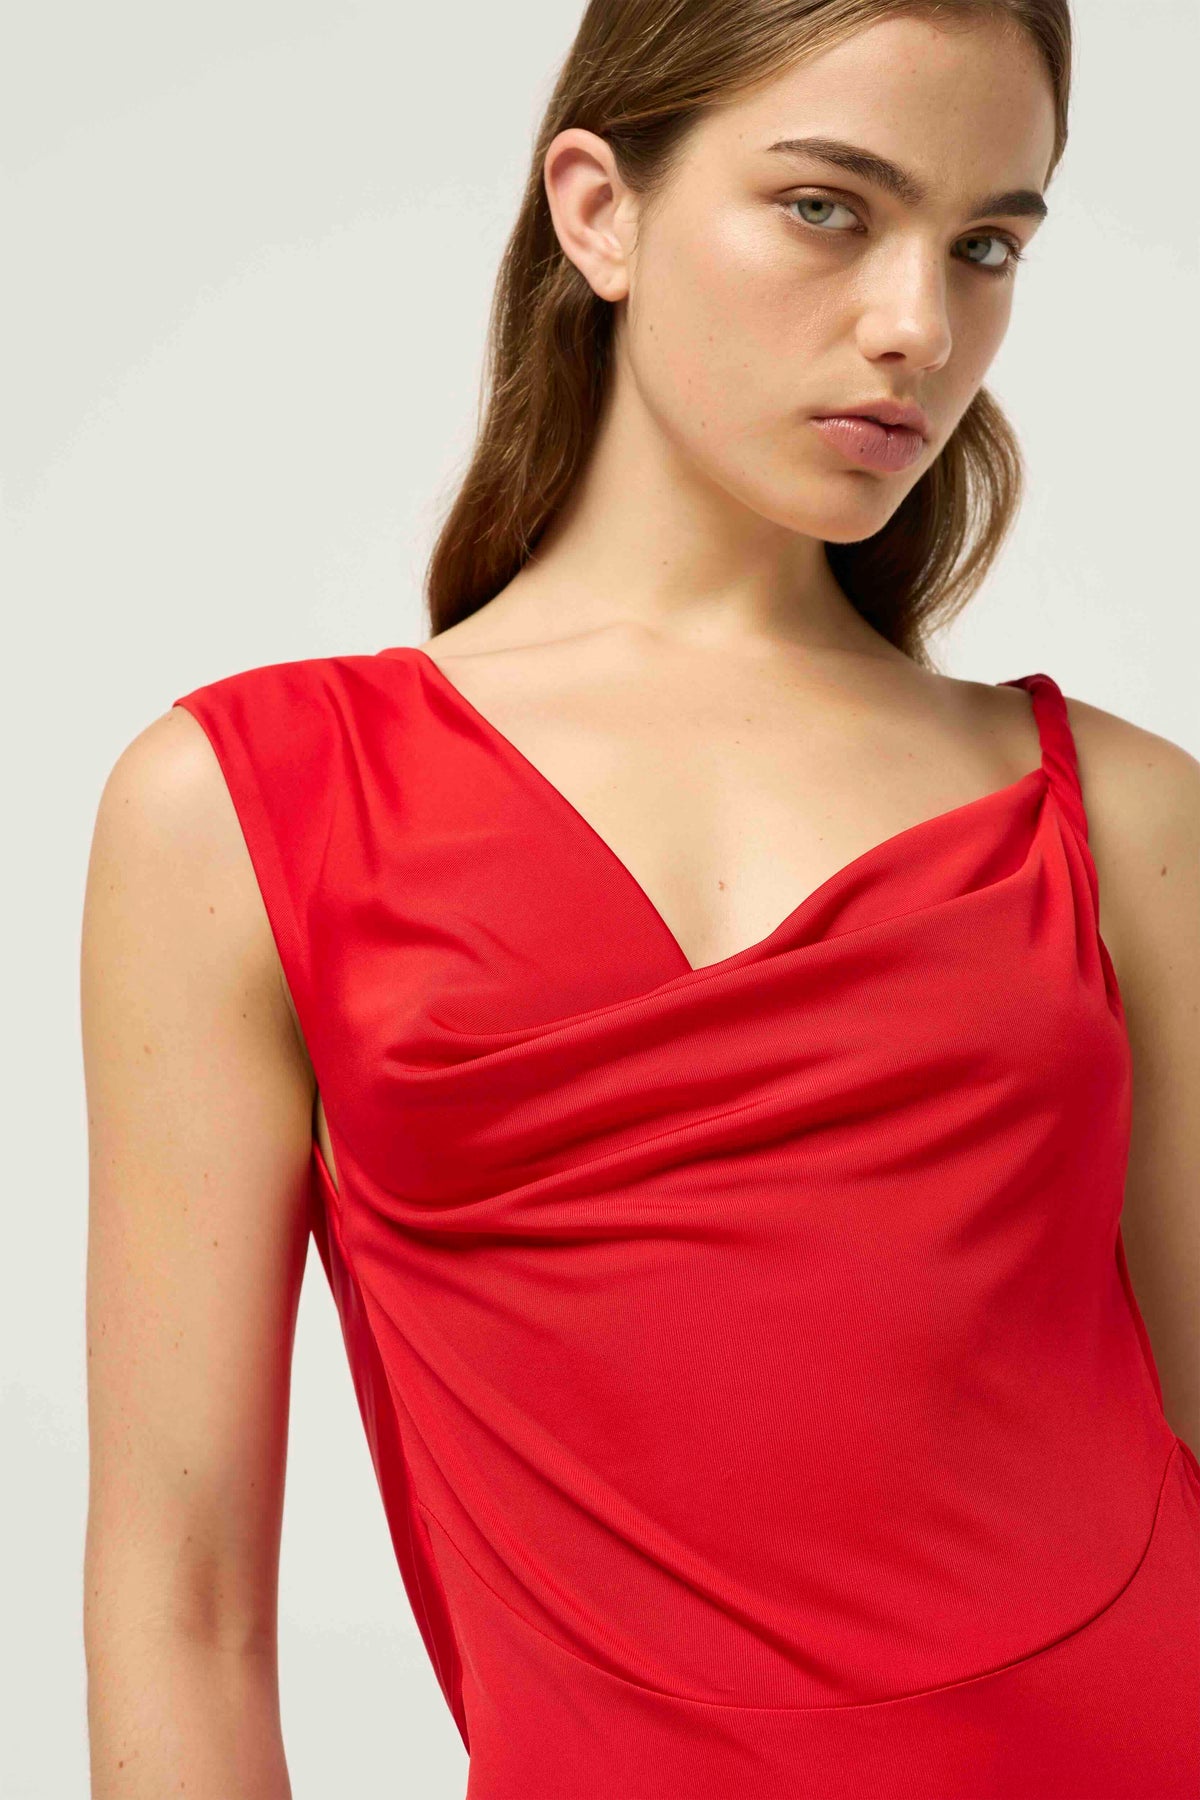 TWISTED WOMANS  DRAPED DRESS - RED